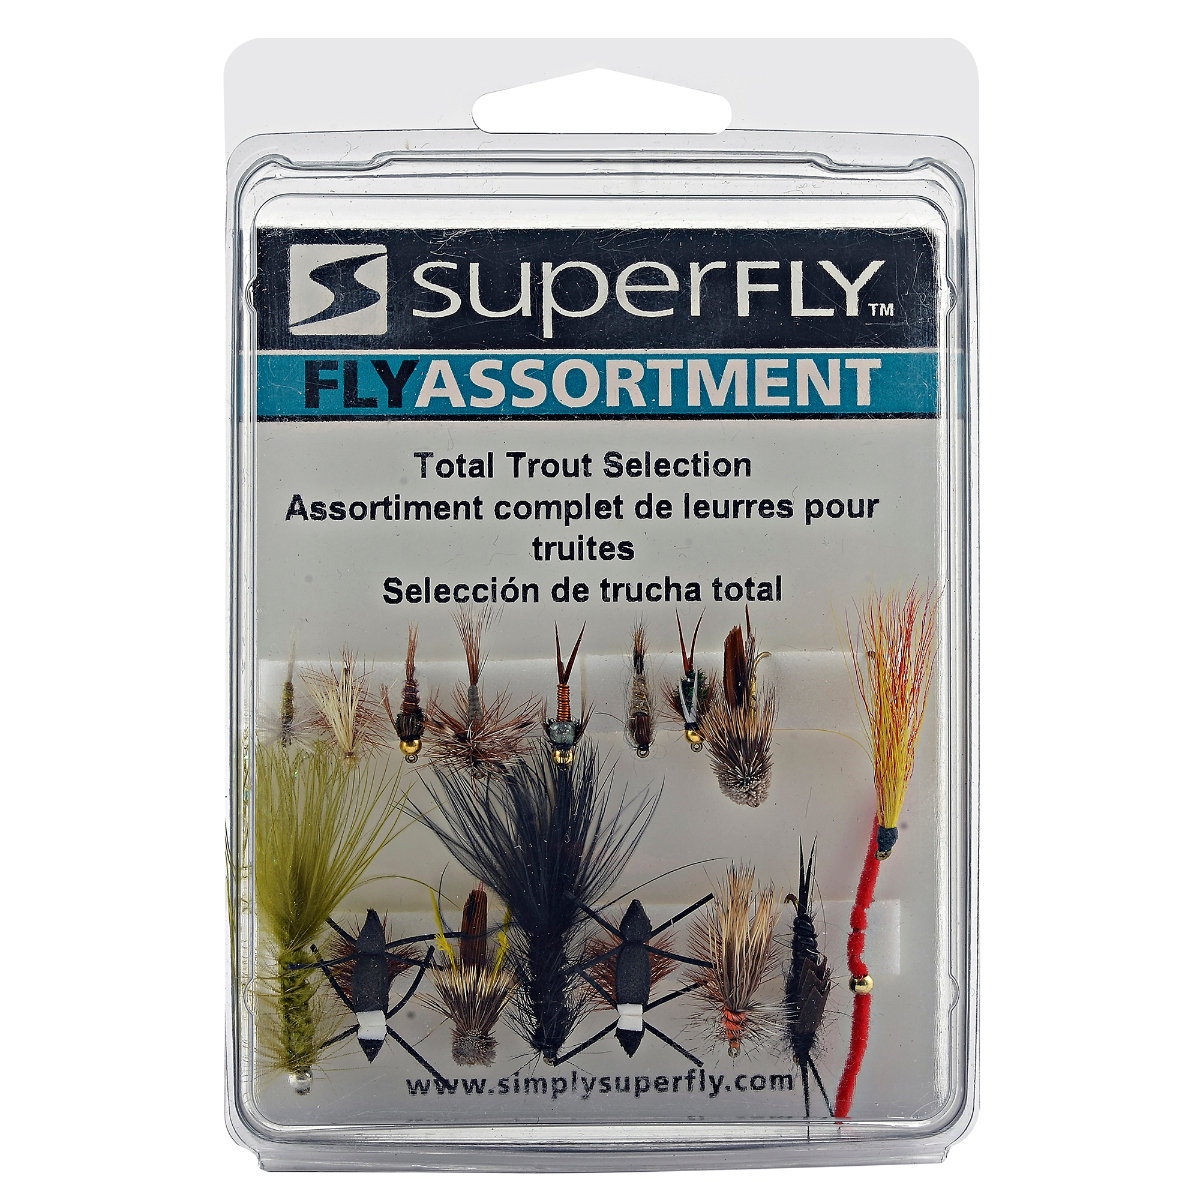 Superfly Total Trout Assortment